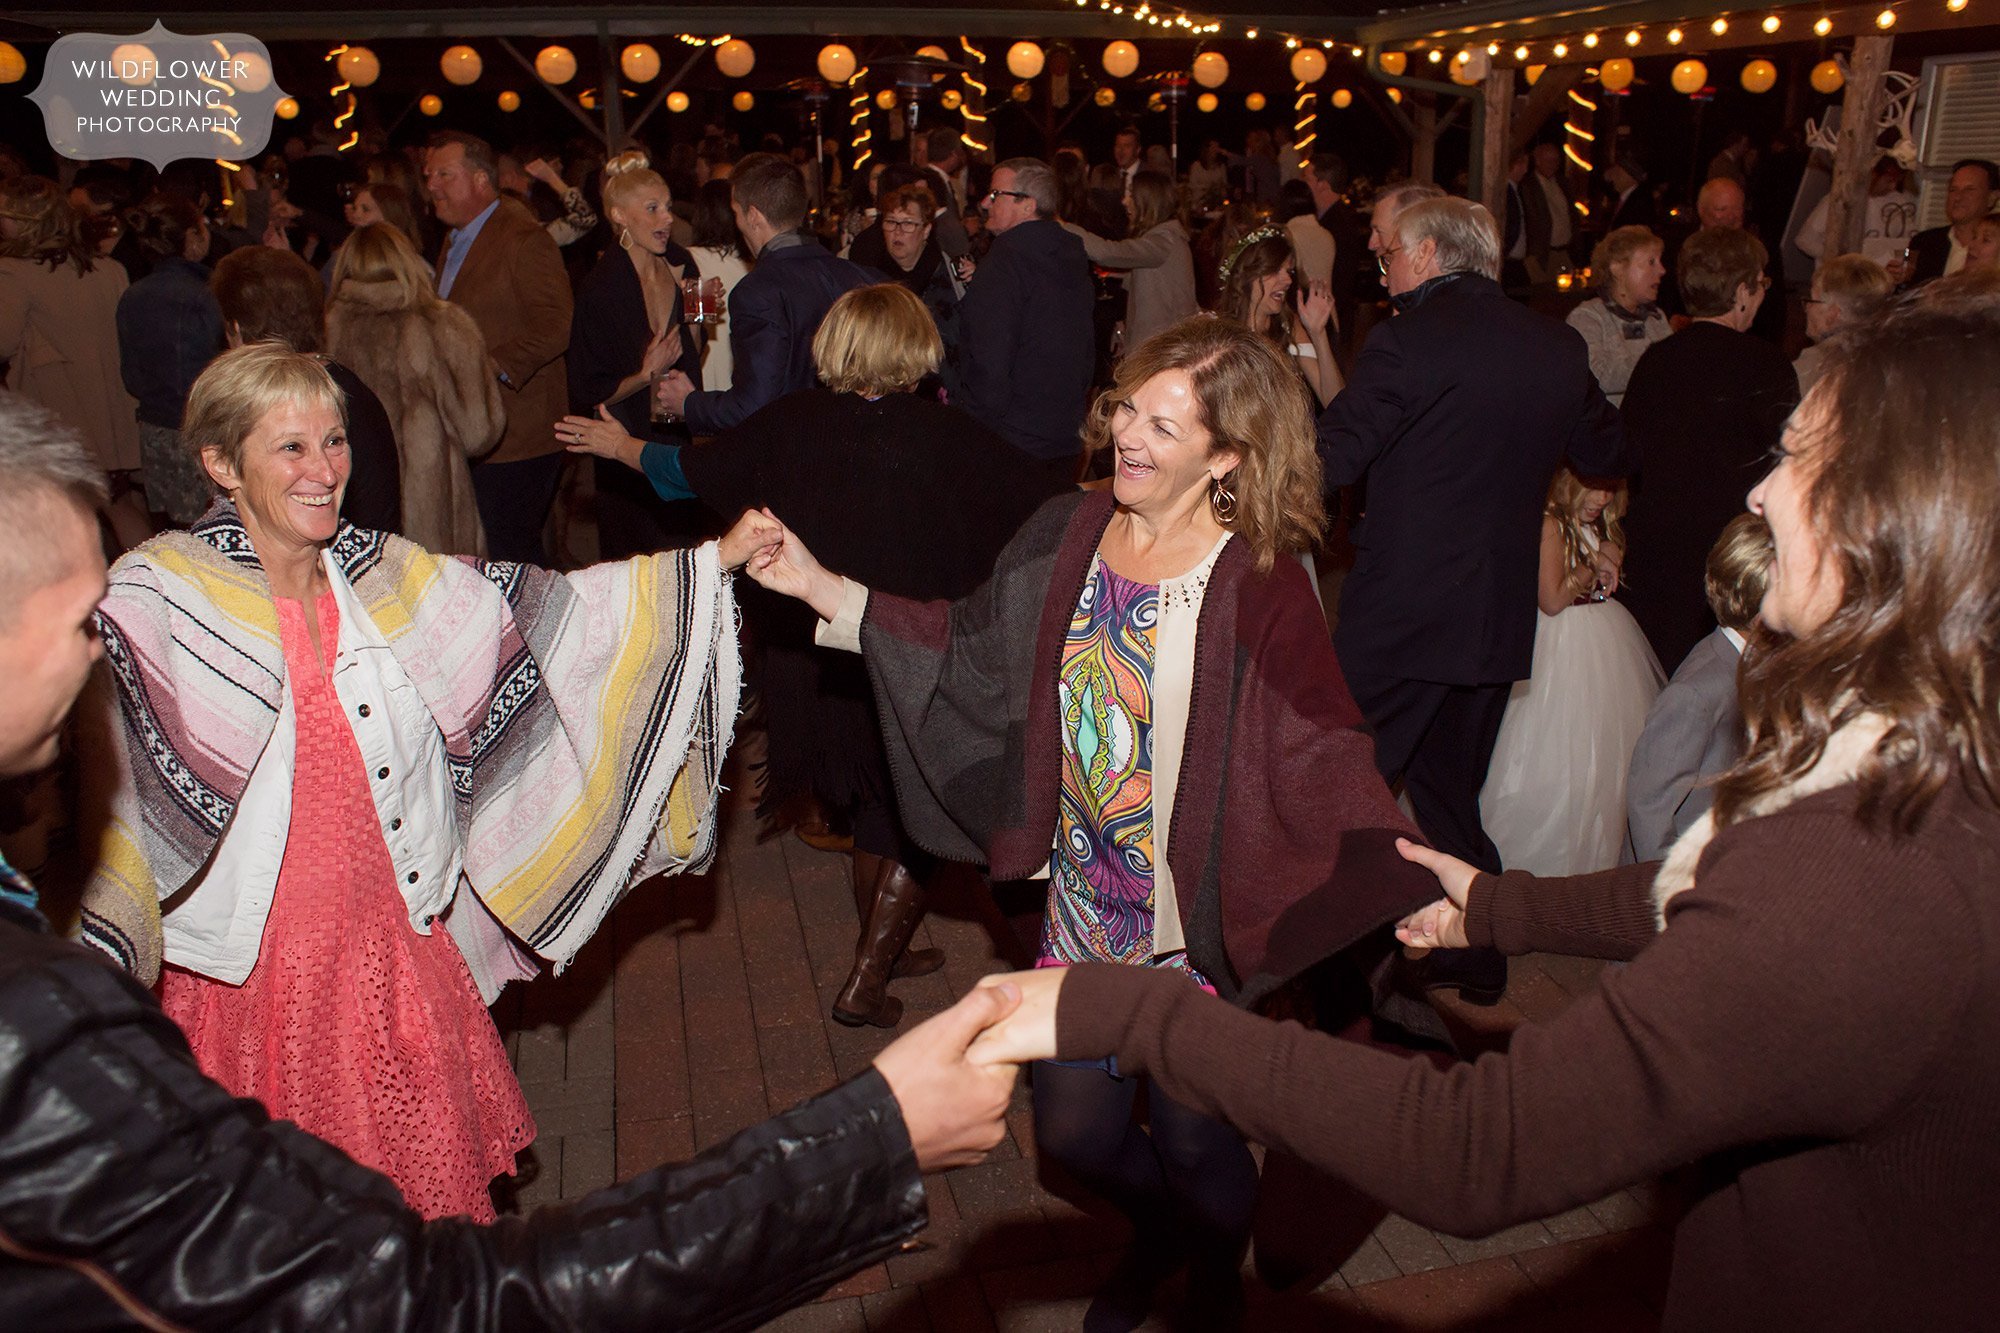 Guests dance outside at this Little Piney Lodge wedding in Mid-MO.